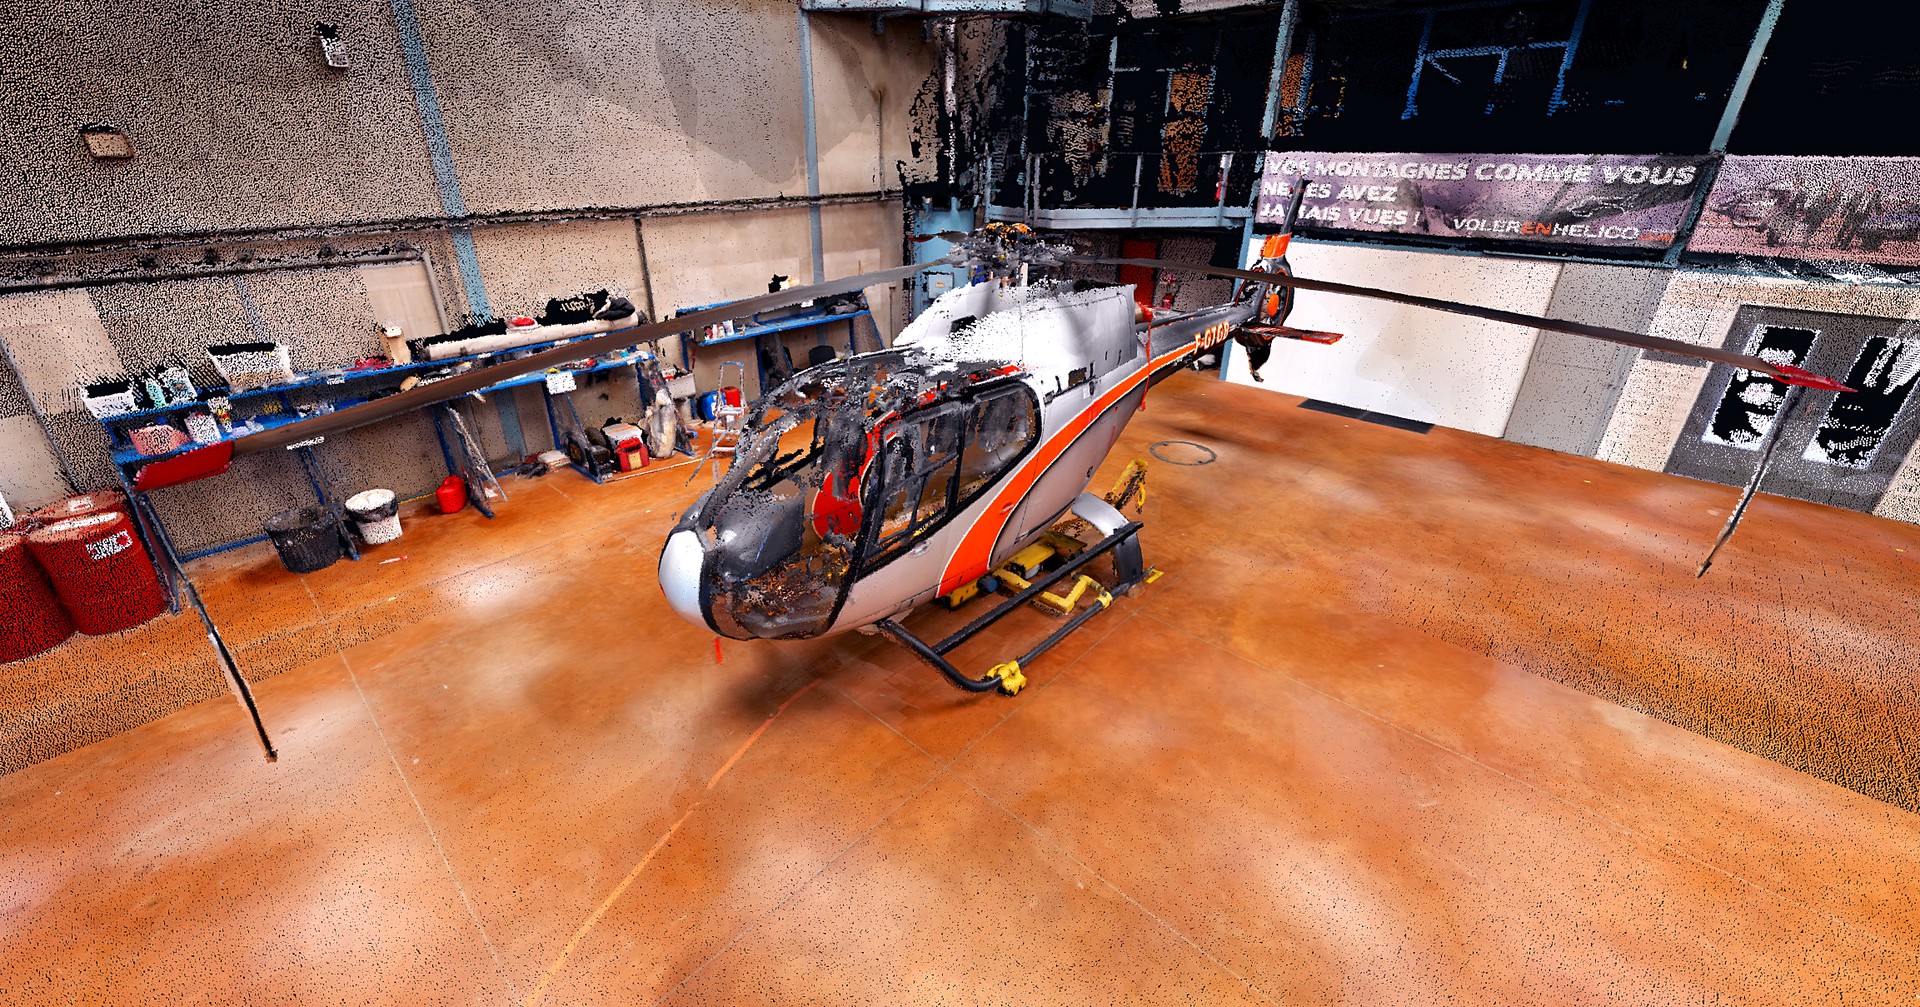 How My Digital Buildings optimized space in a helicopter hangar